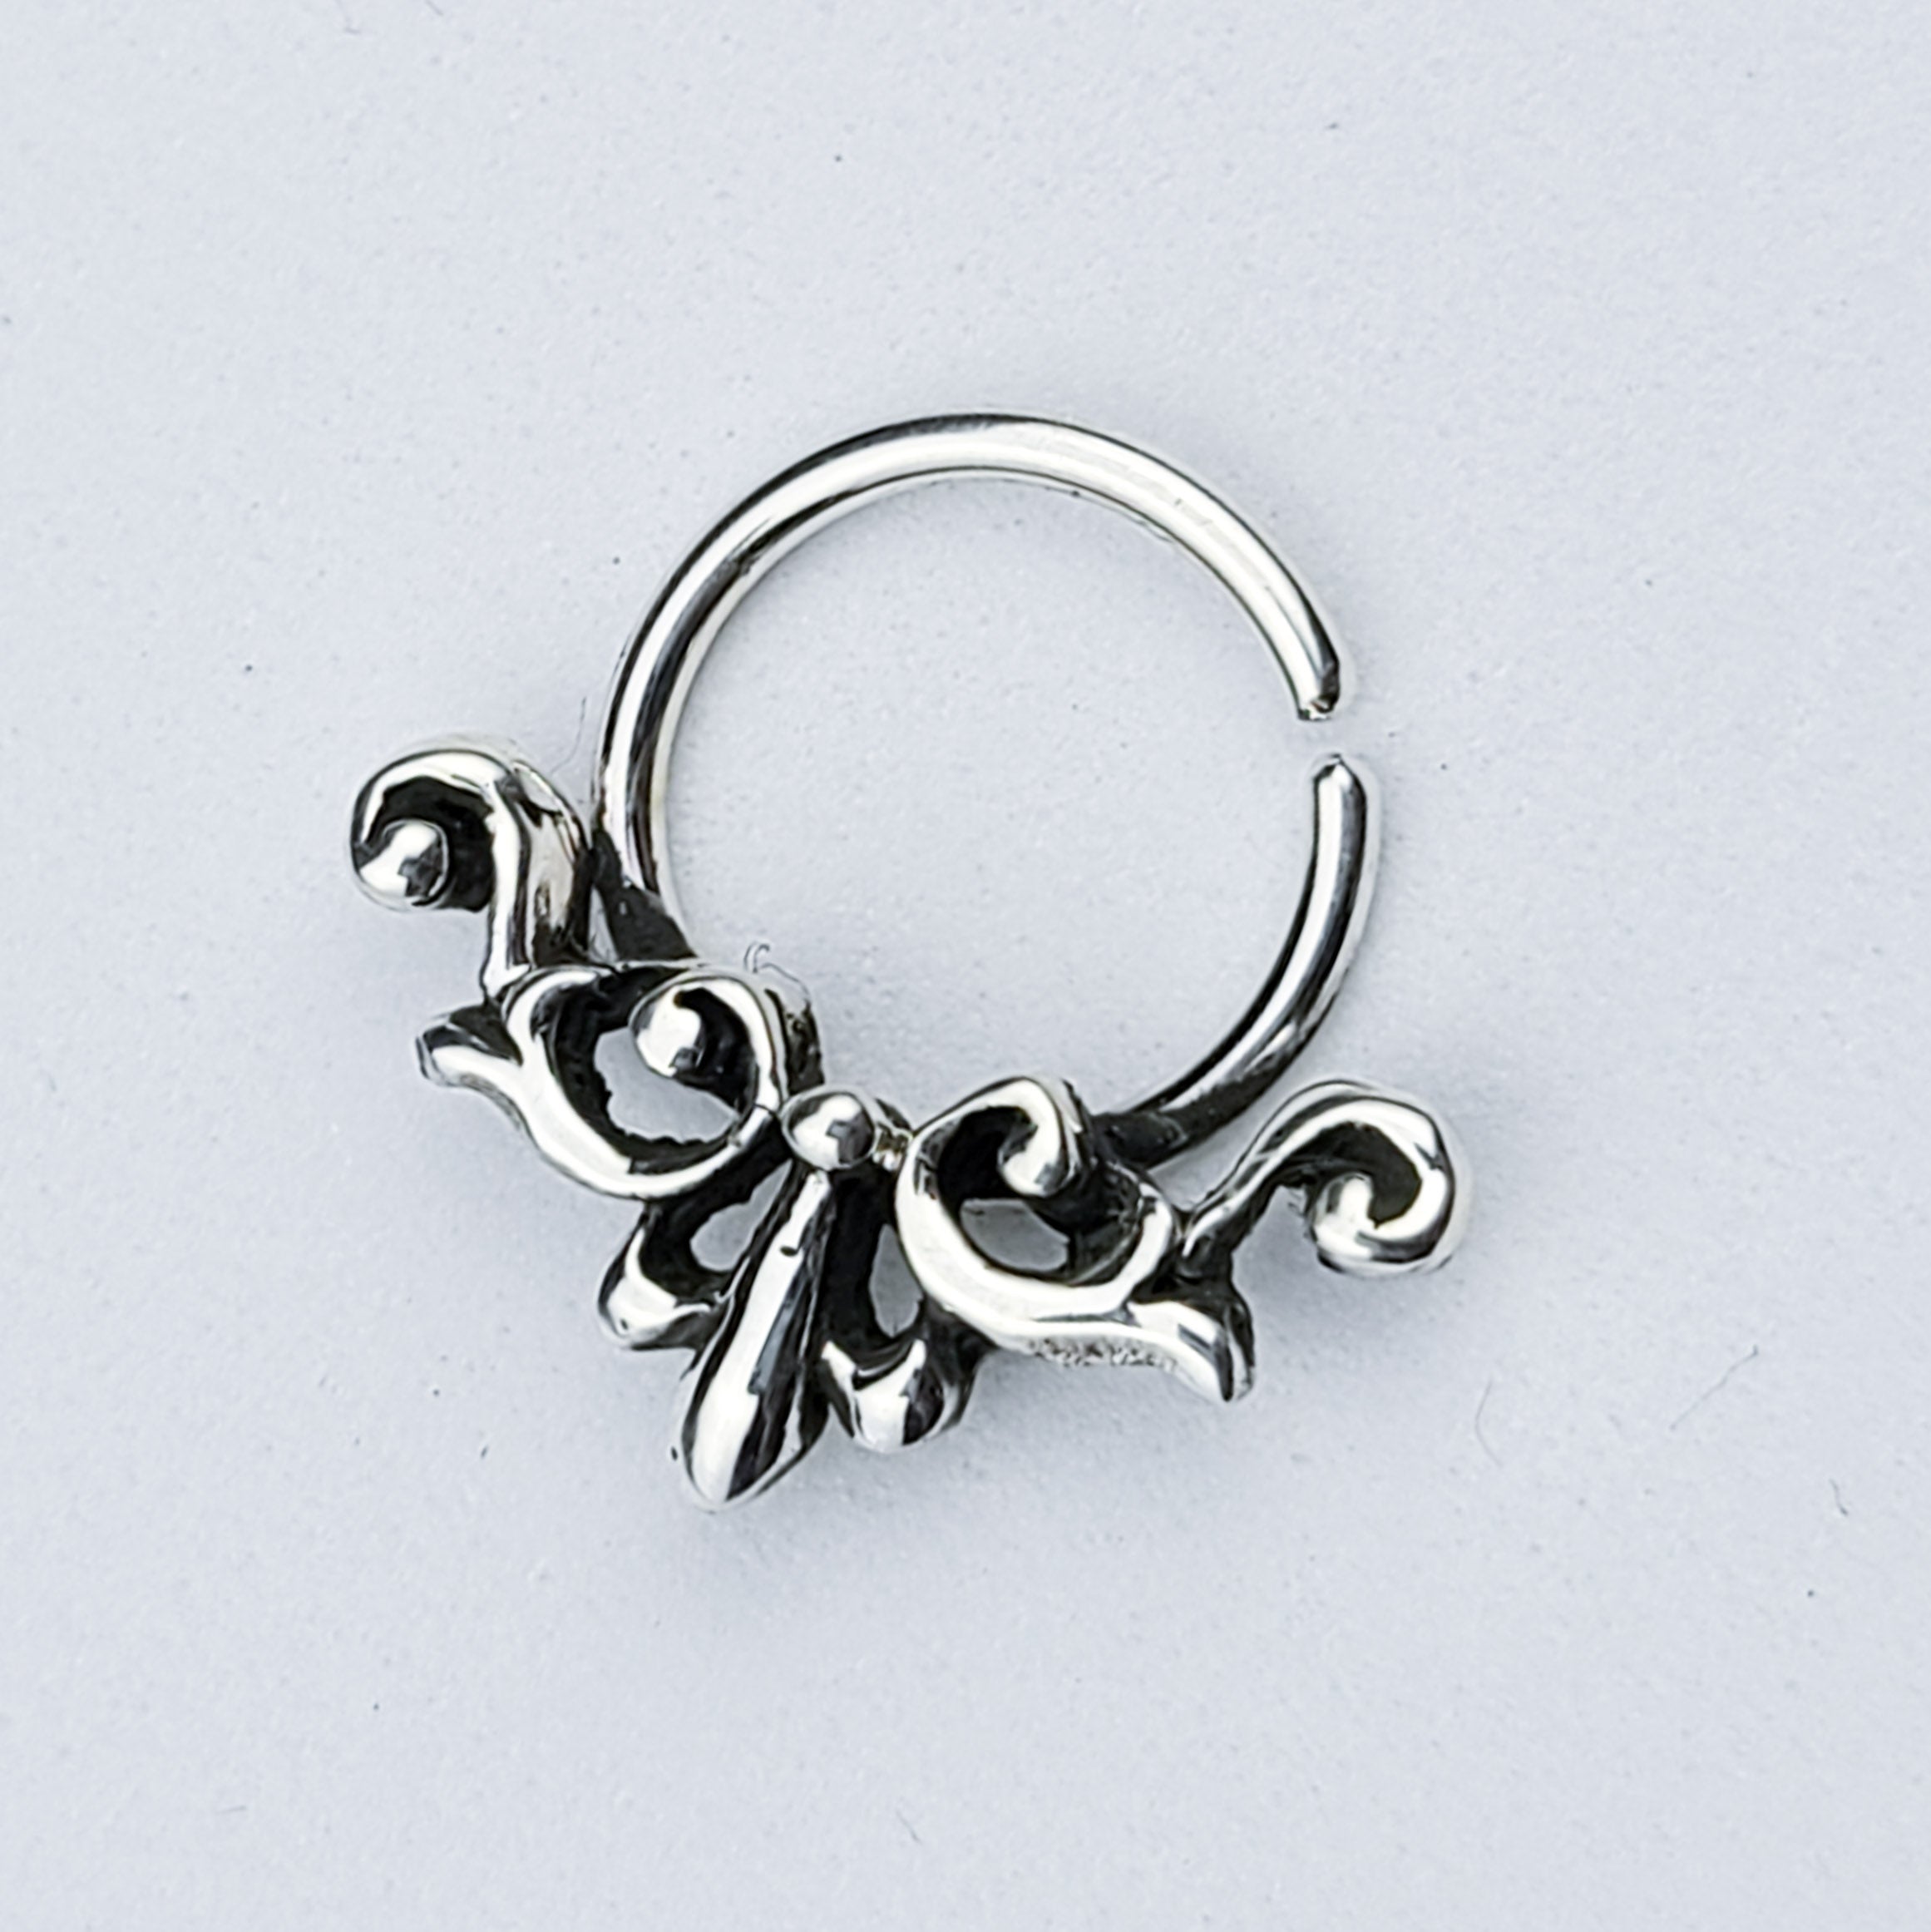 Buy Silver Septum Ring, Silver Septum, Tribal Septum Hoop, Silver Septum  Piercing Ring, Grape Nose Ring, Small Tribal Septum Ring, Body Jewelry  Online in India - Etsy